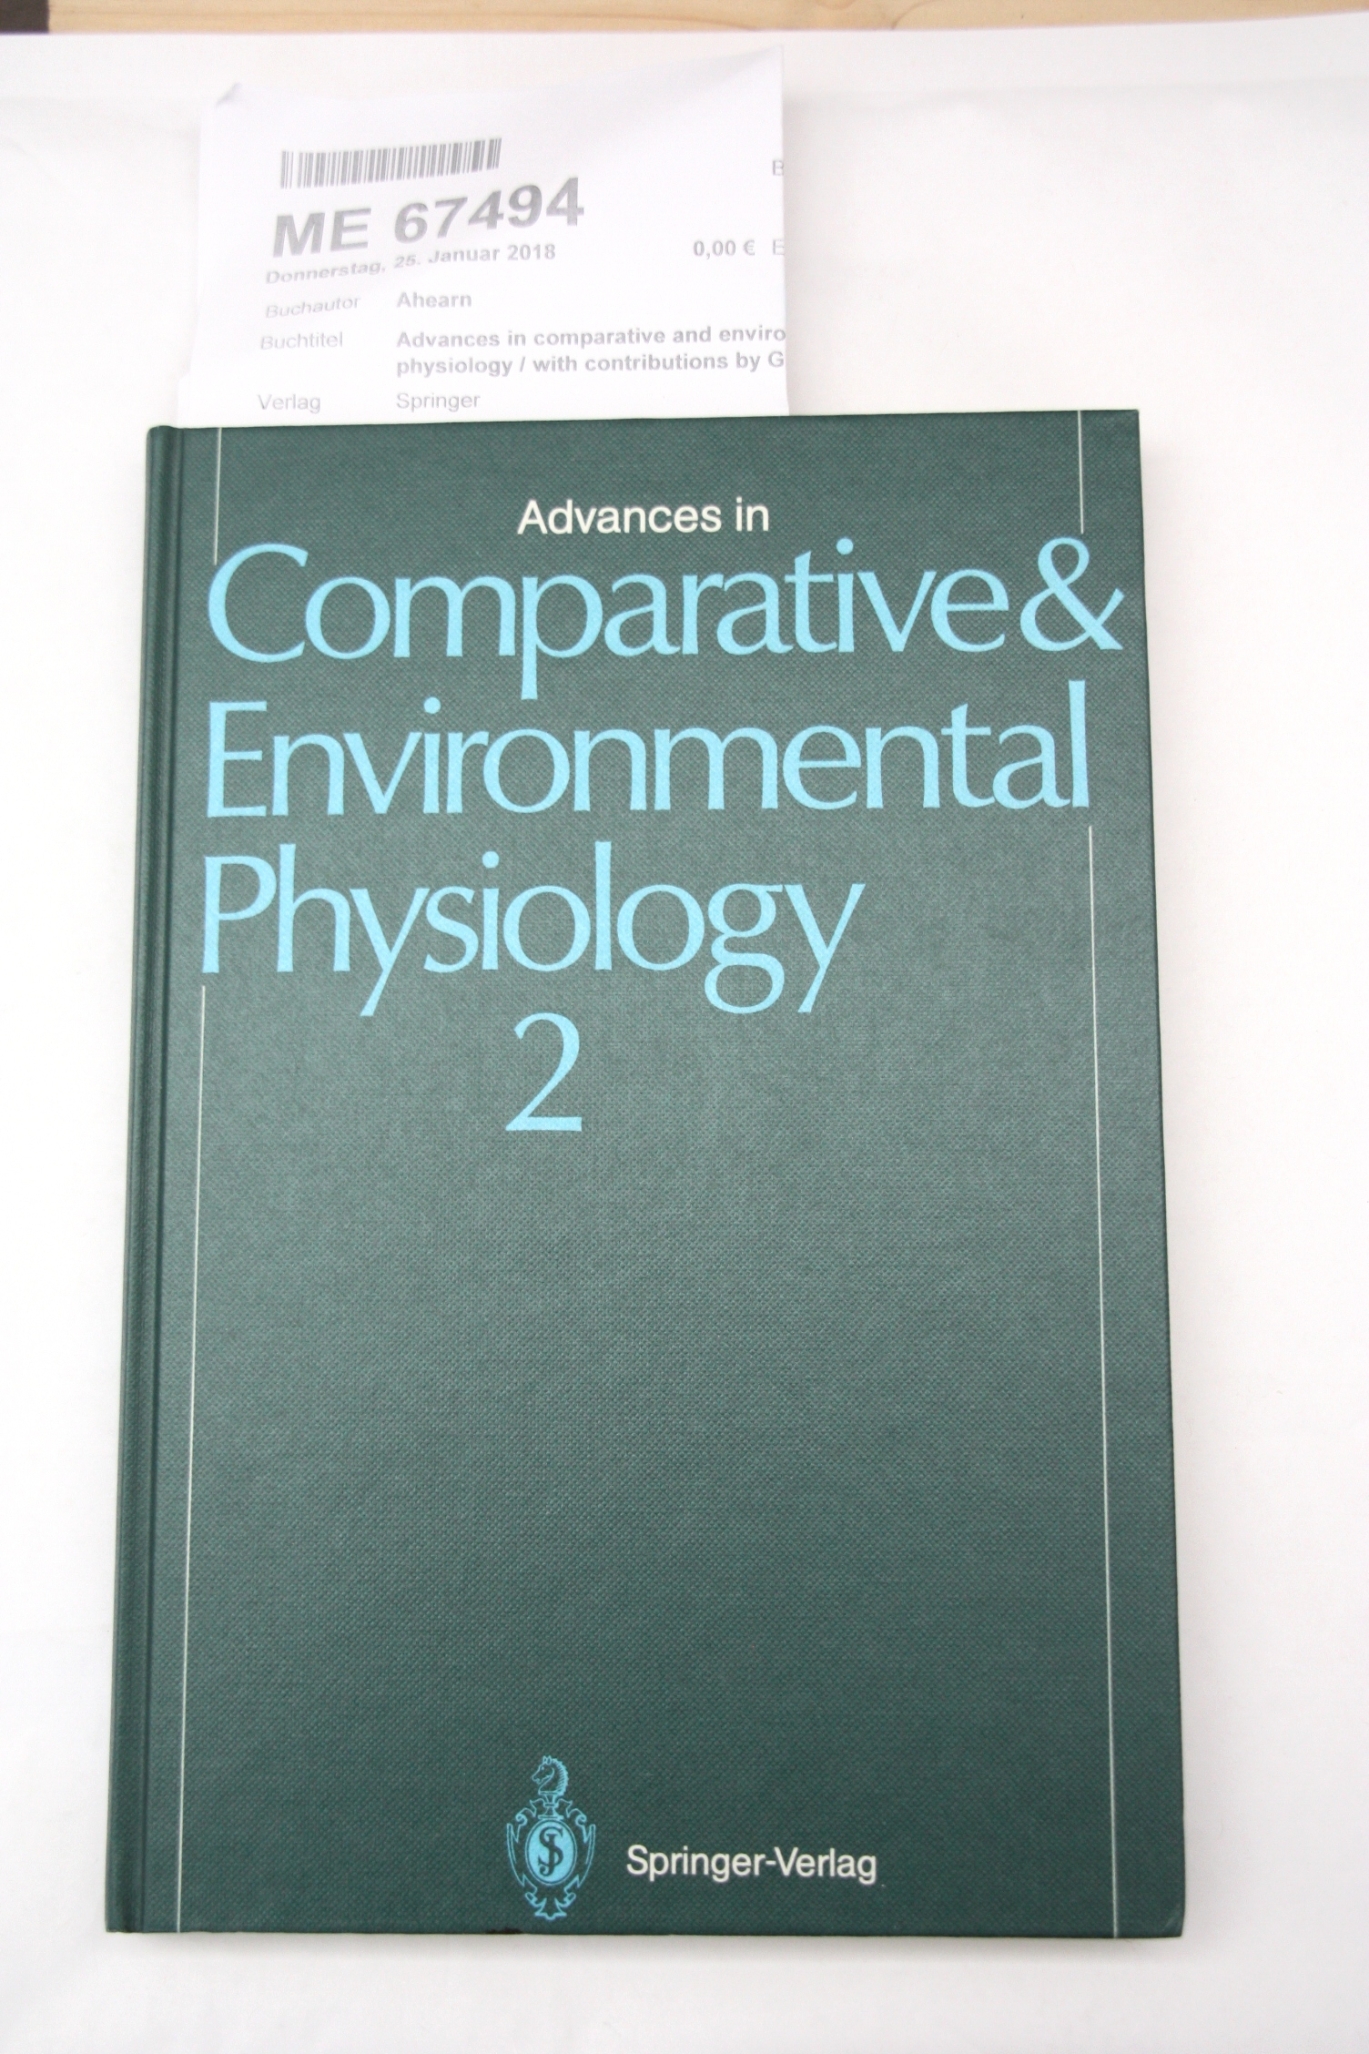 Ahearn, G. A. (Mitverf.): Advances in comparative and environmental physiology / with contributions by G. A. Ahearn ... 